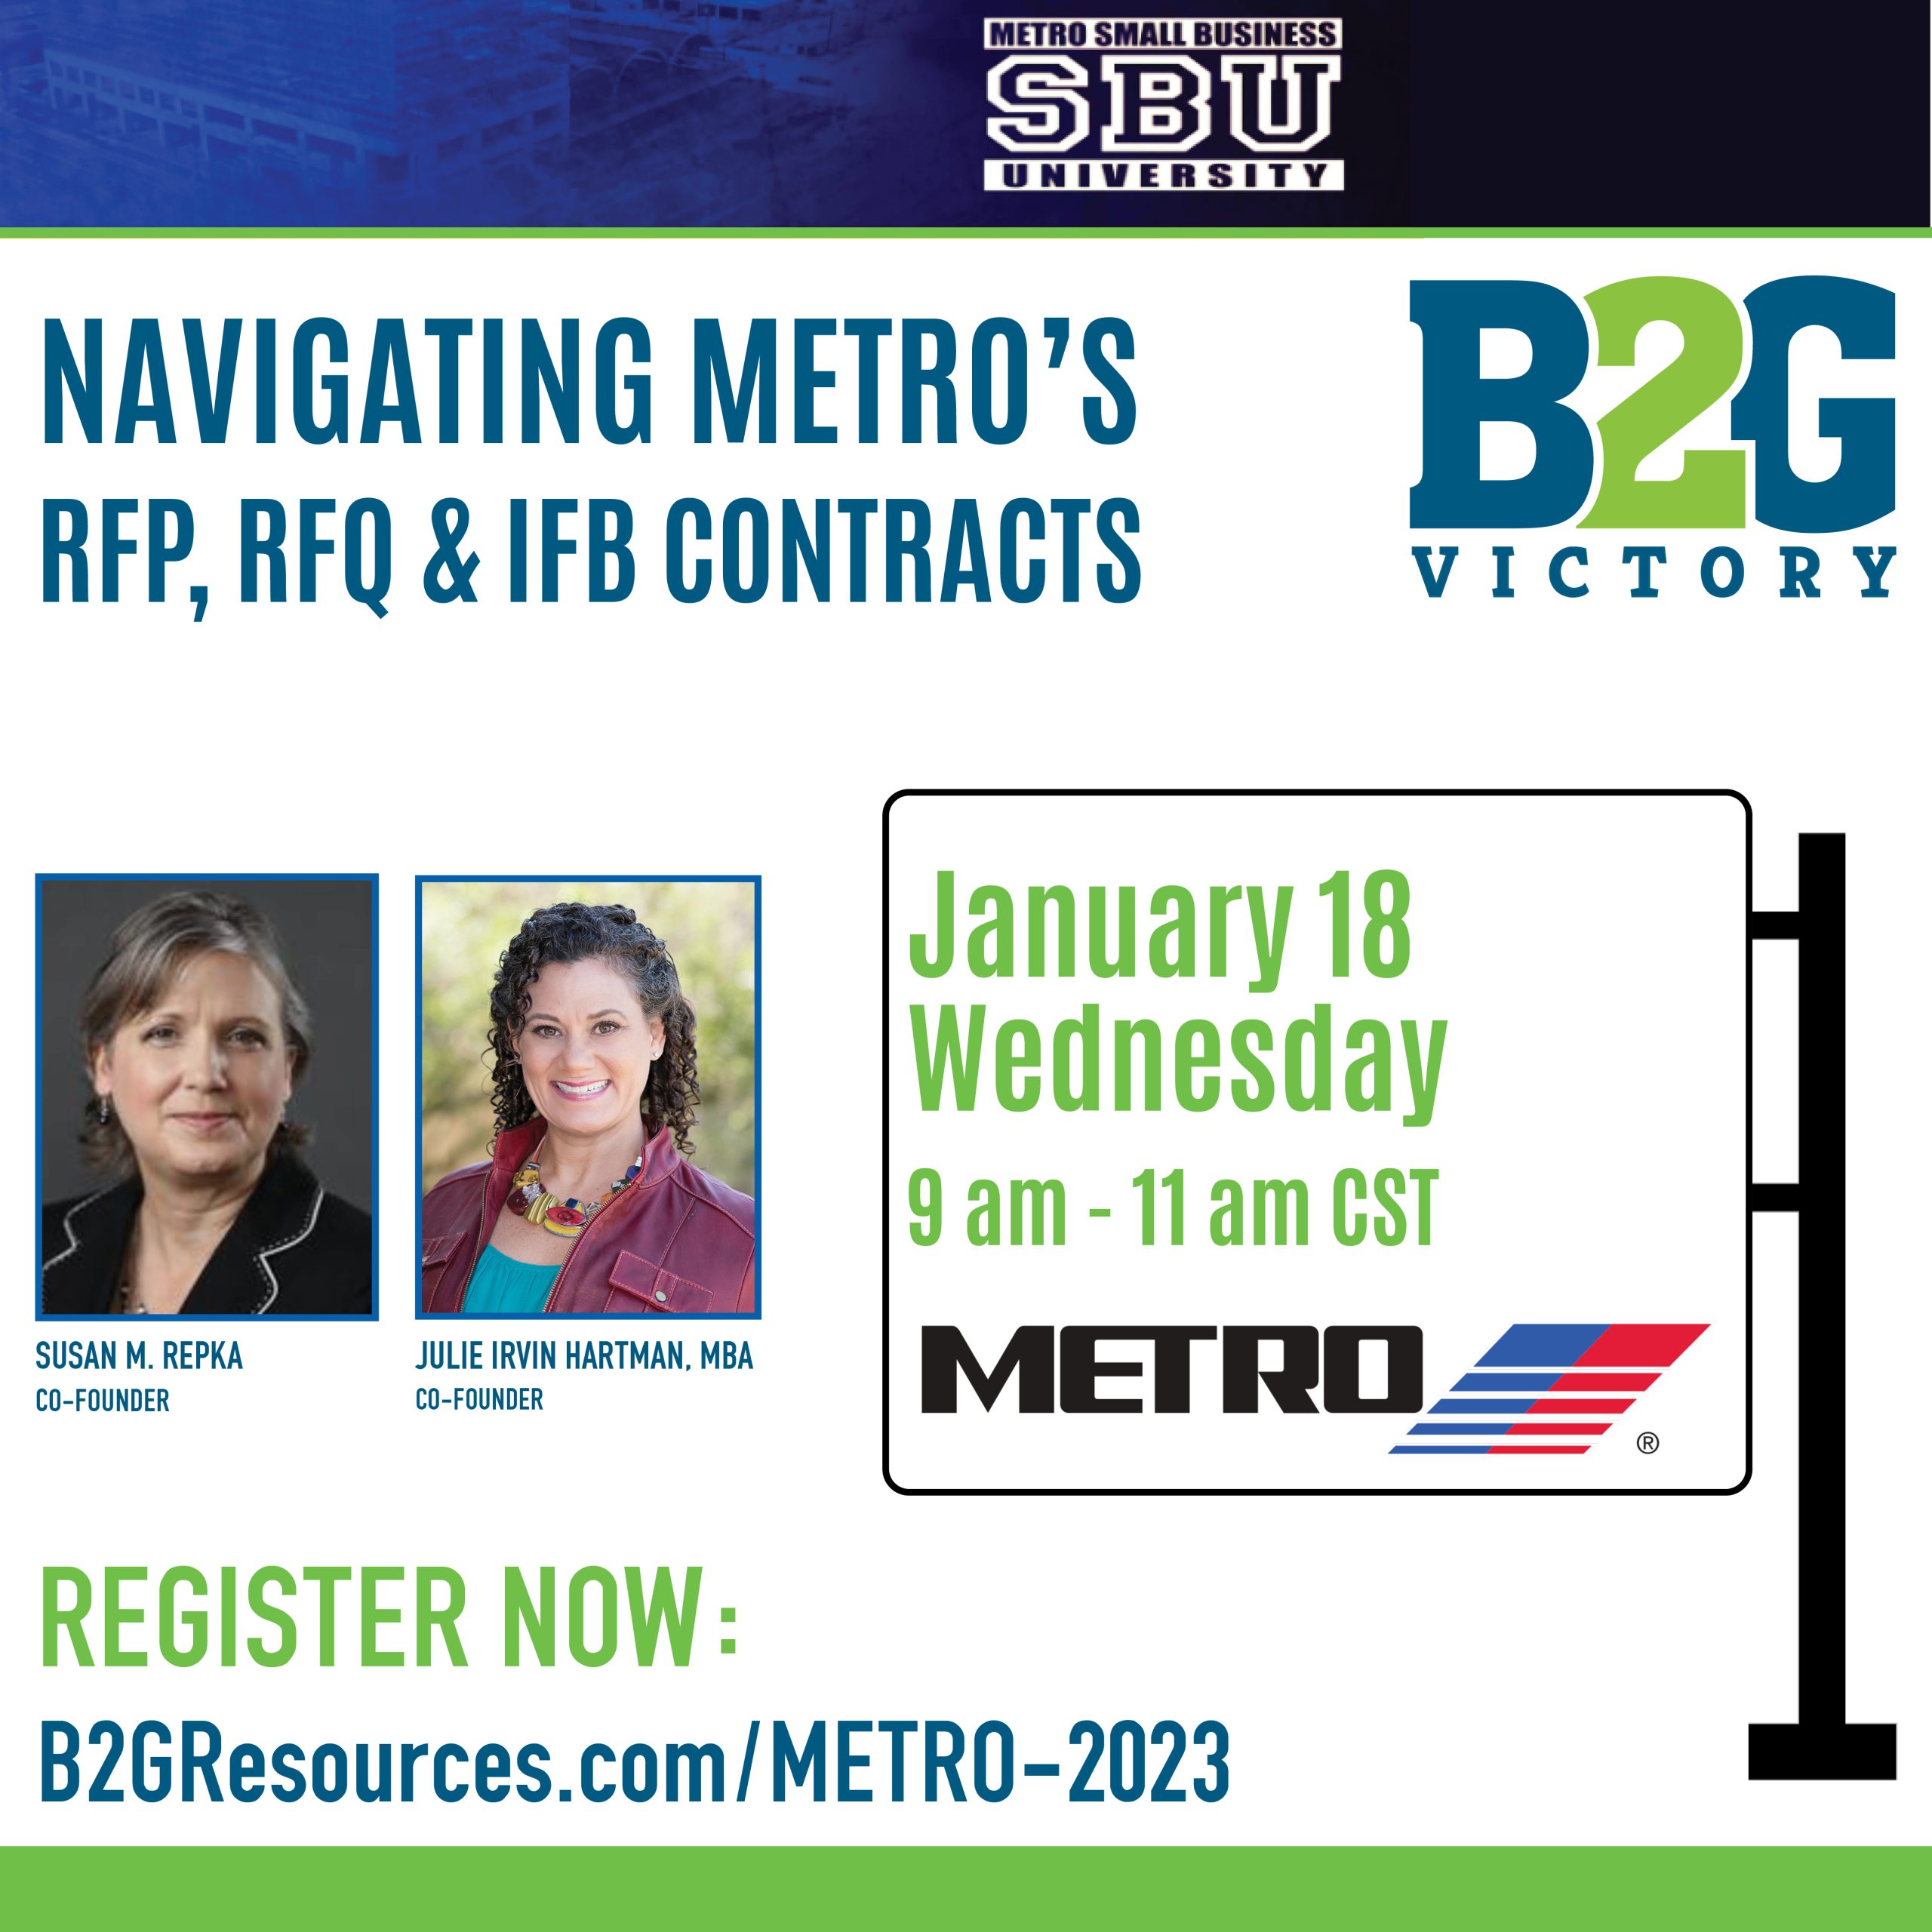 Navigating METRO’s RFP, RFQ, and IFB contracts in-person on Feb. 18, 2023